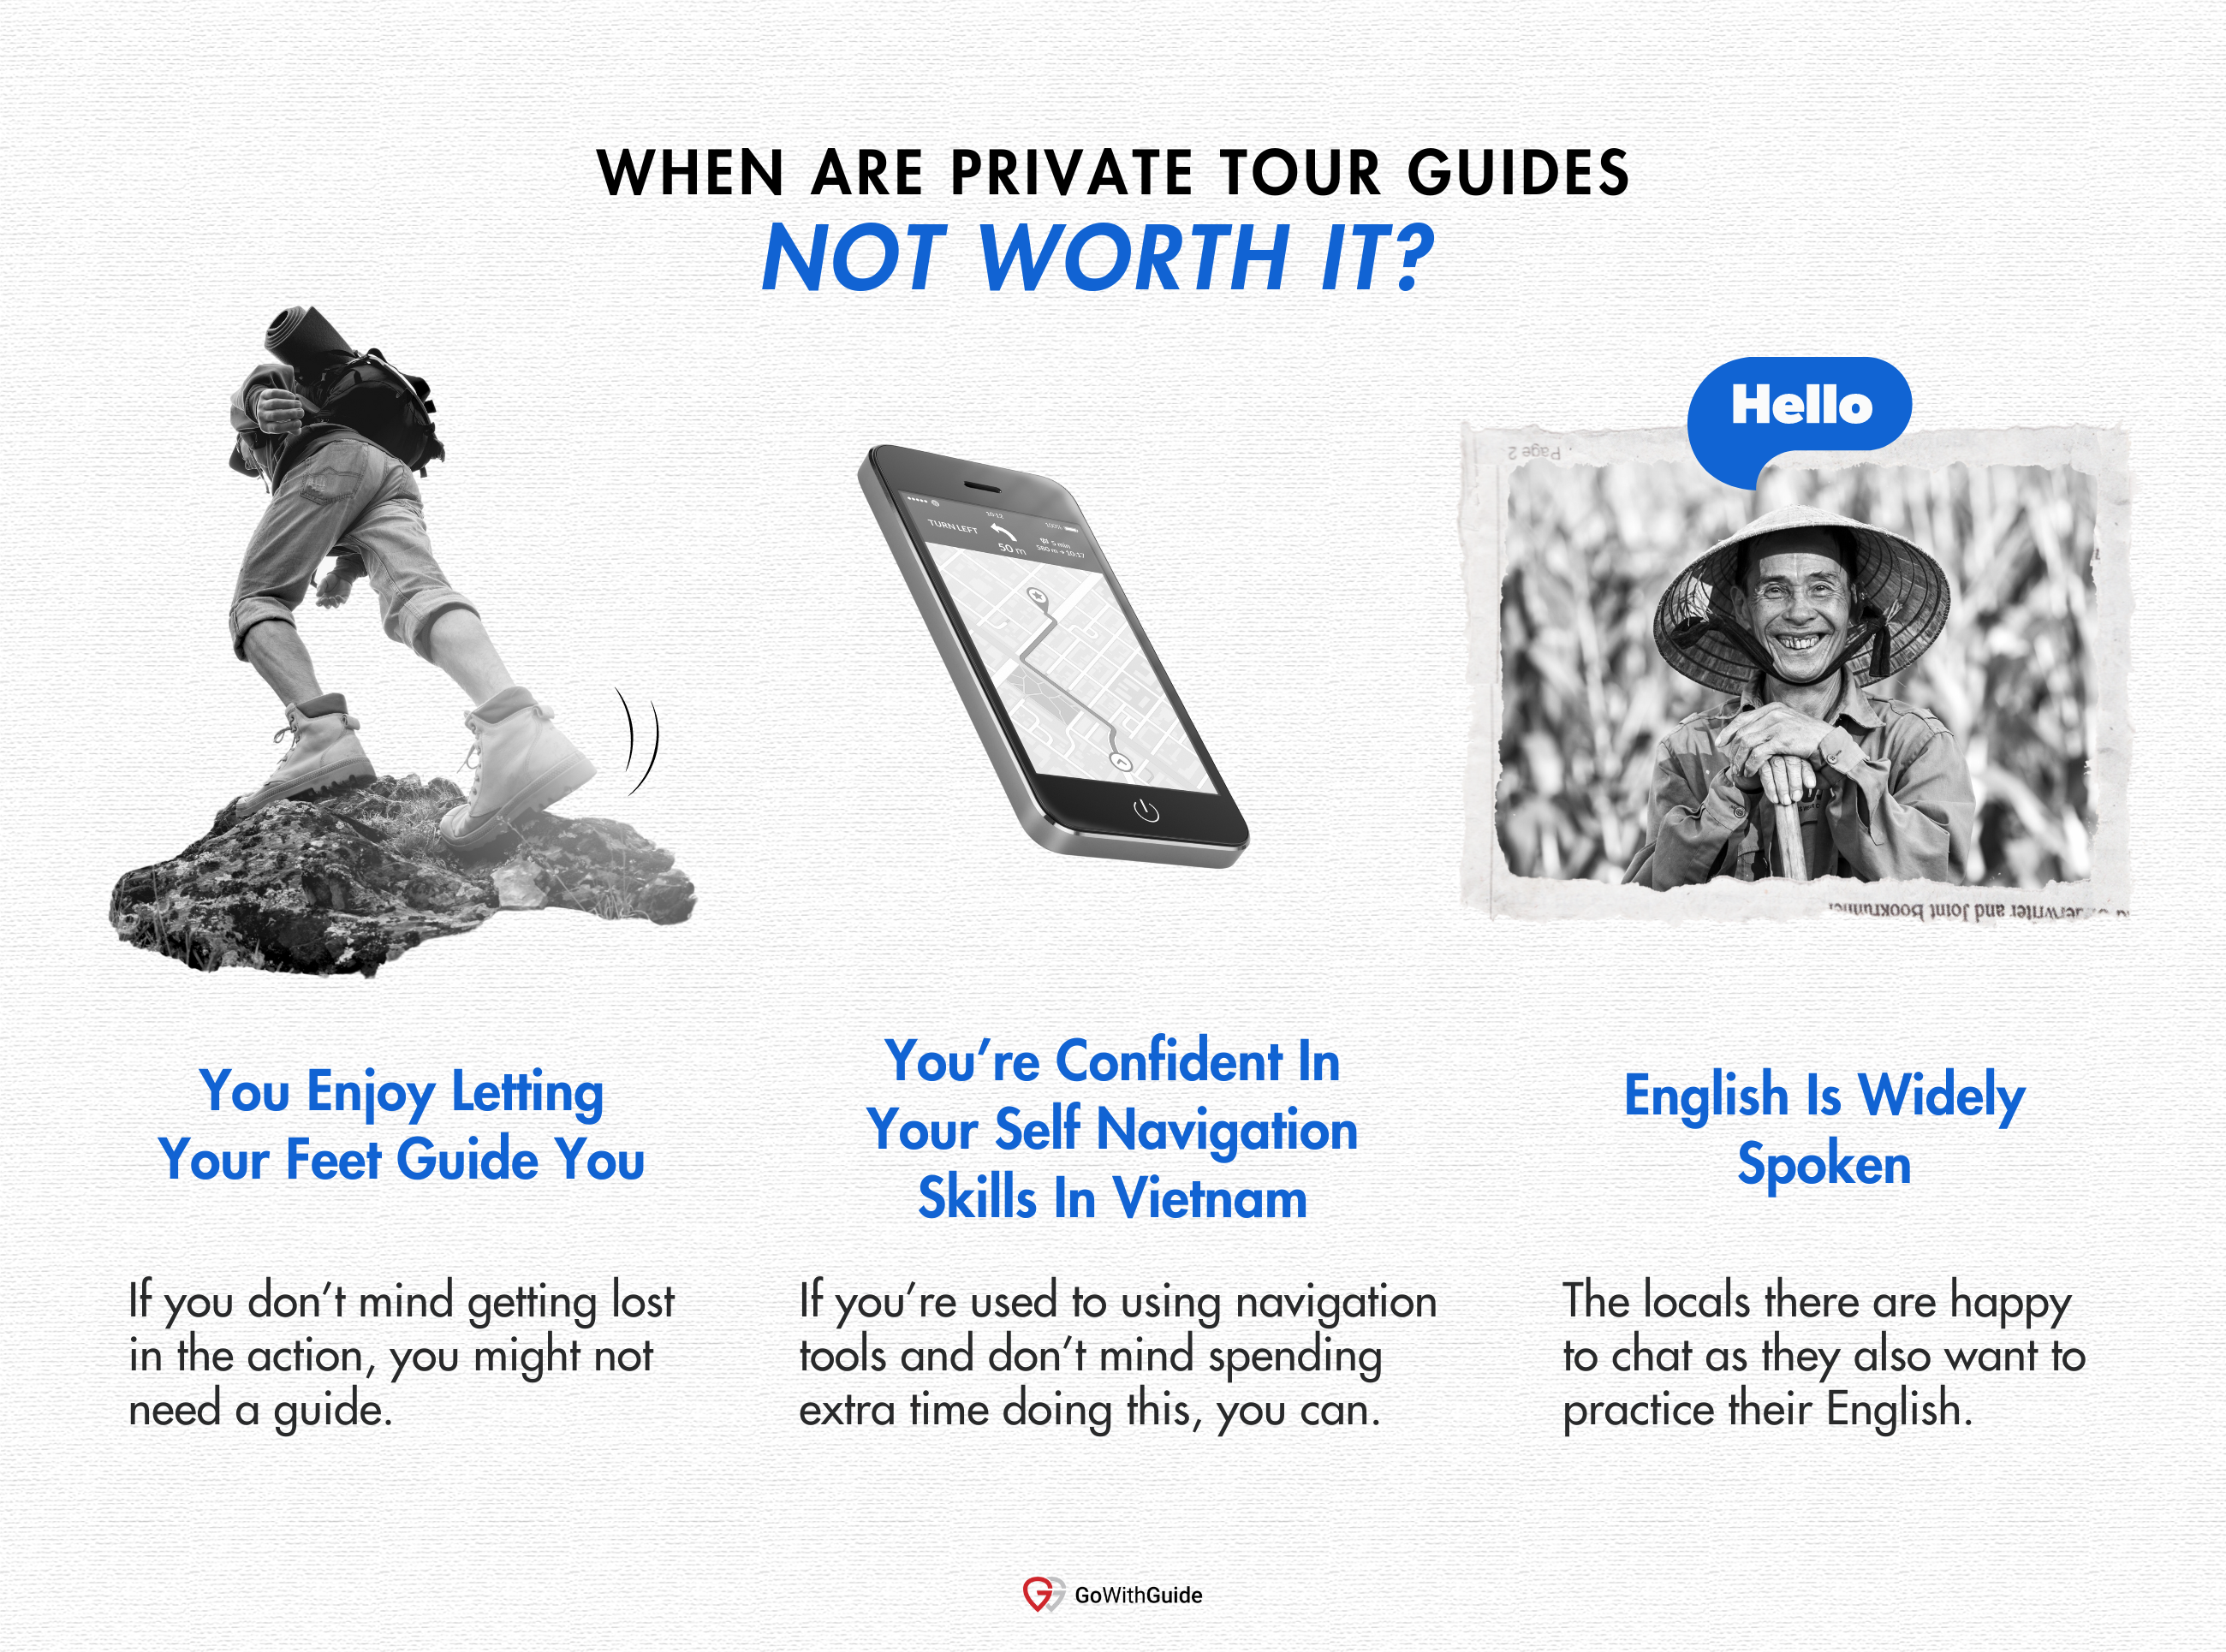 An infographic detailing three reasons private guides in Vietnam may not be worth it (self navigation skills, some people like wandering, and english is widely spoken) 